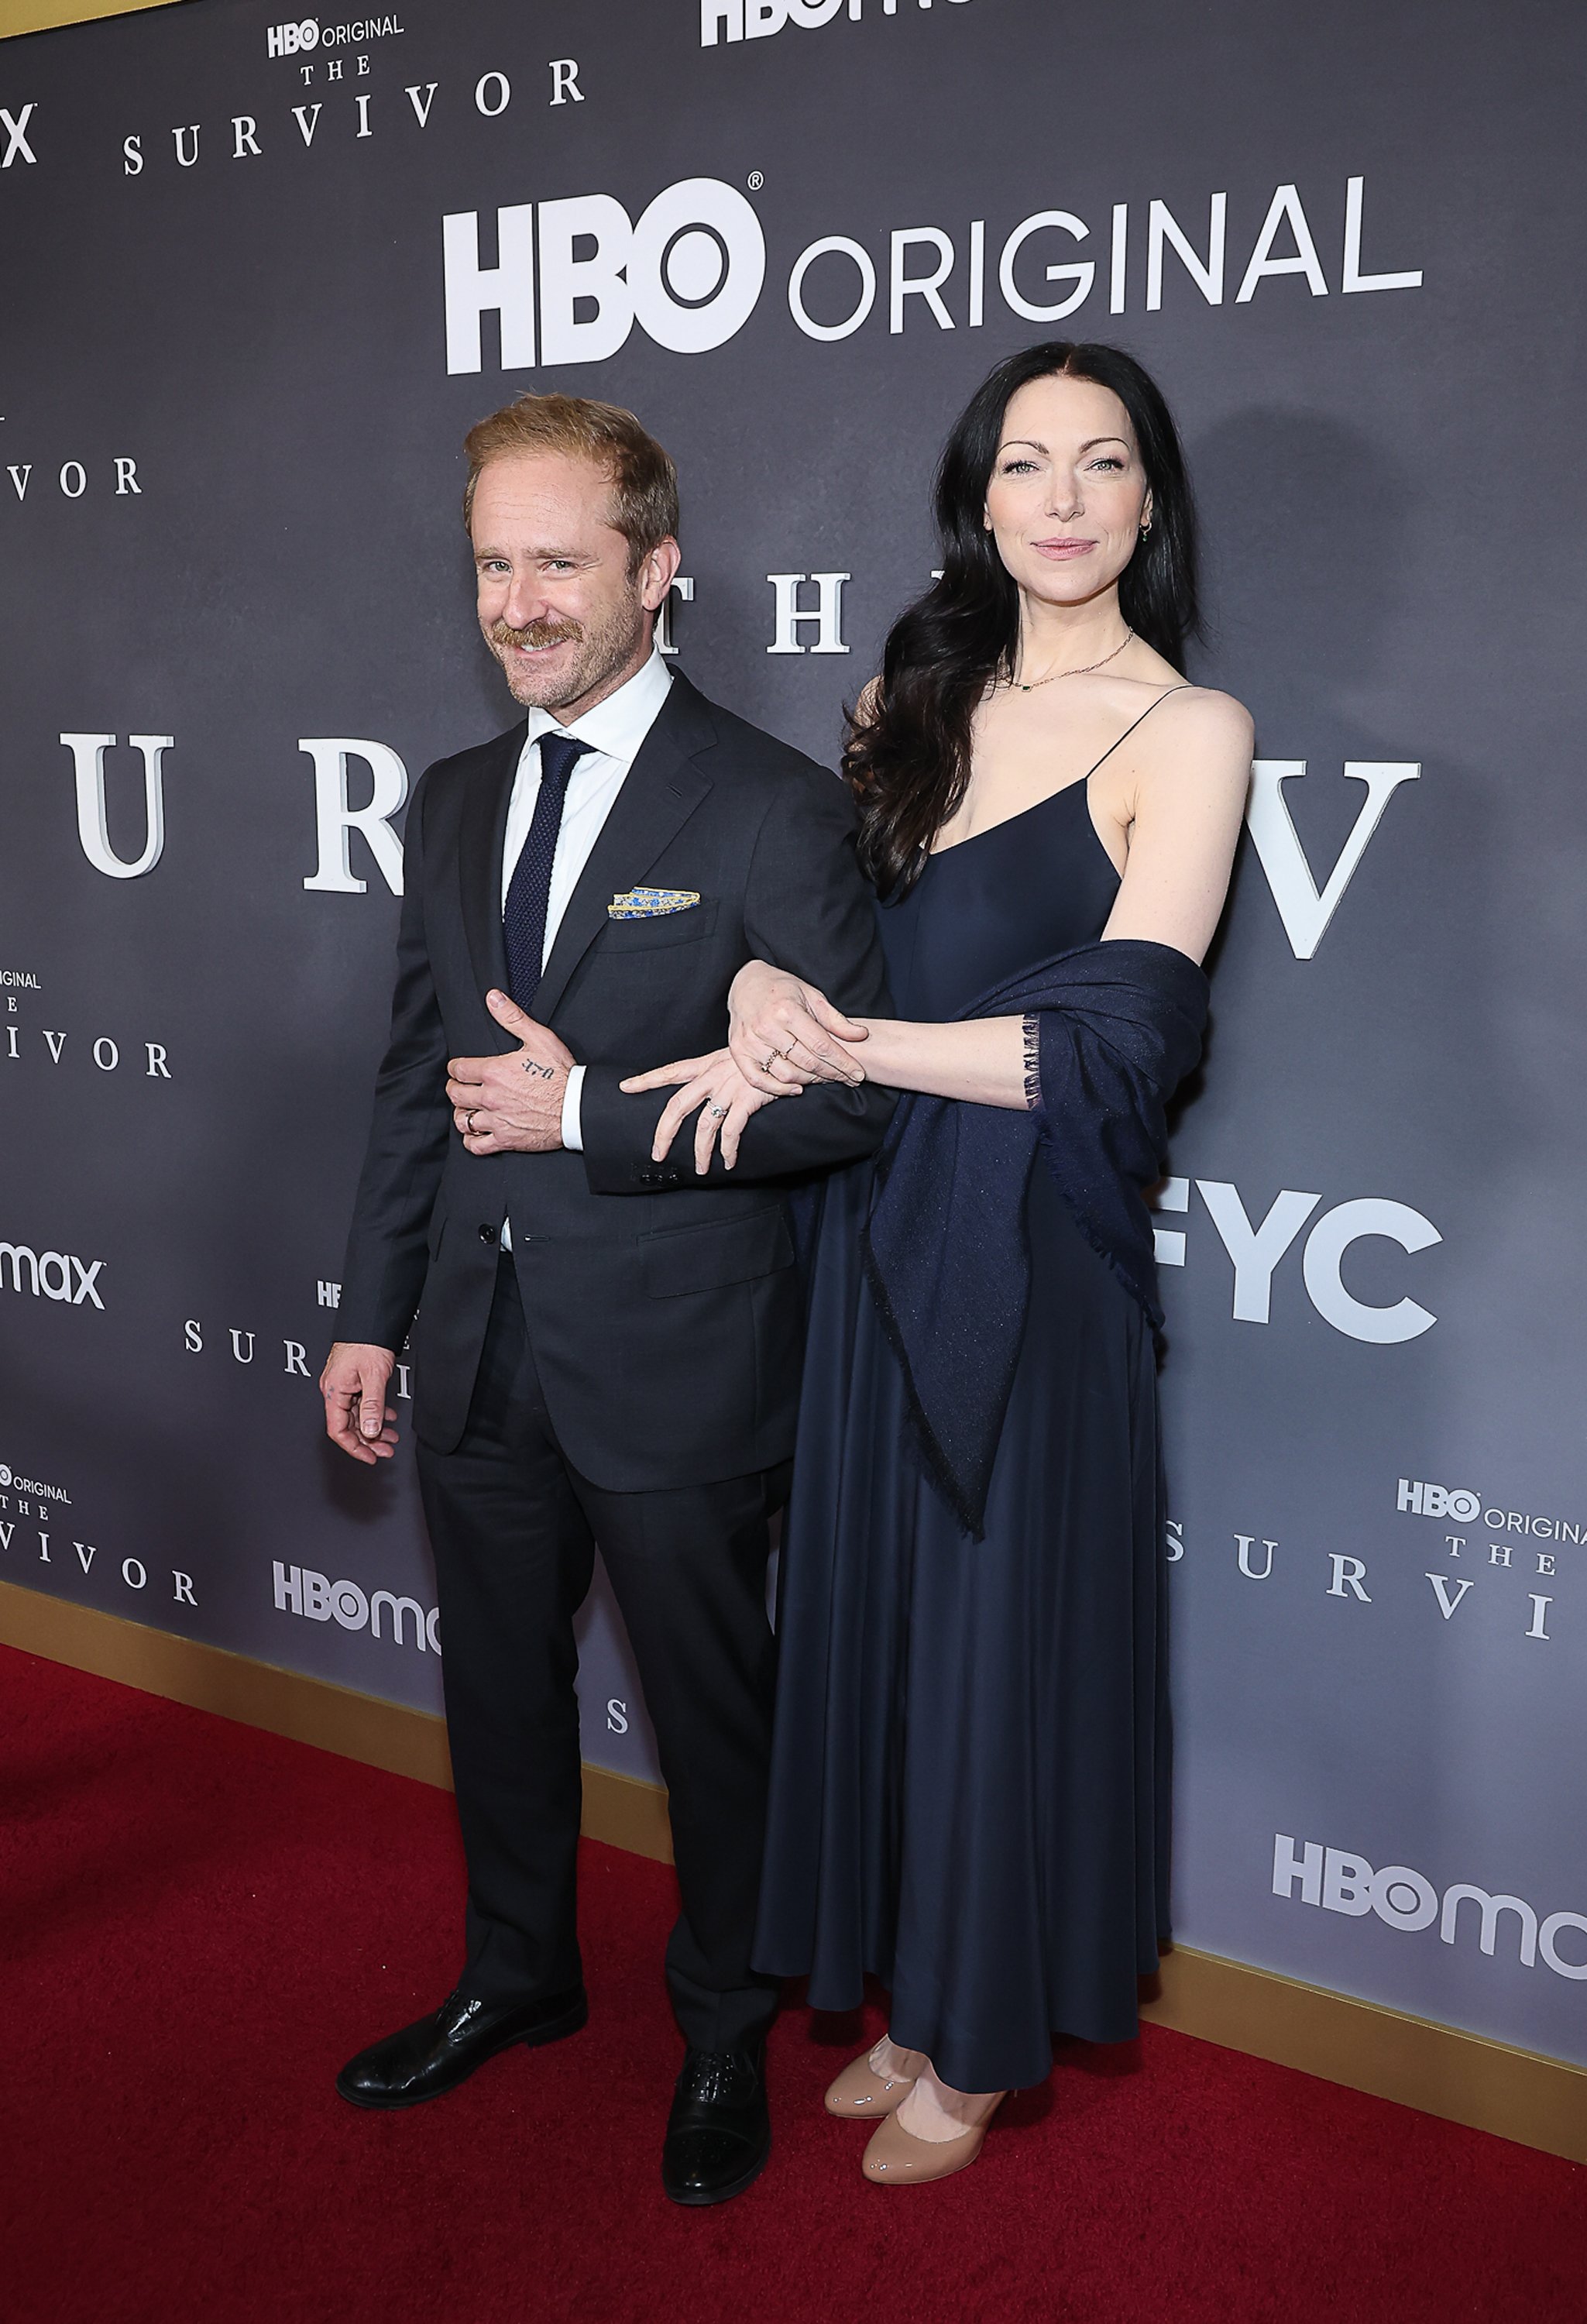 Ben Foster and Laura Prepon attends the HBO "The Survivor" New York Premiere at Temple Emanu-El in New York City | Source: Getty Images